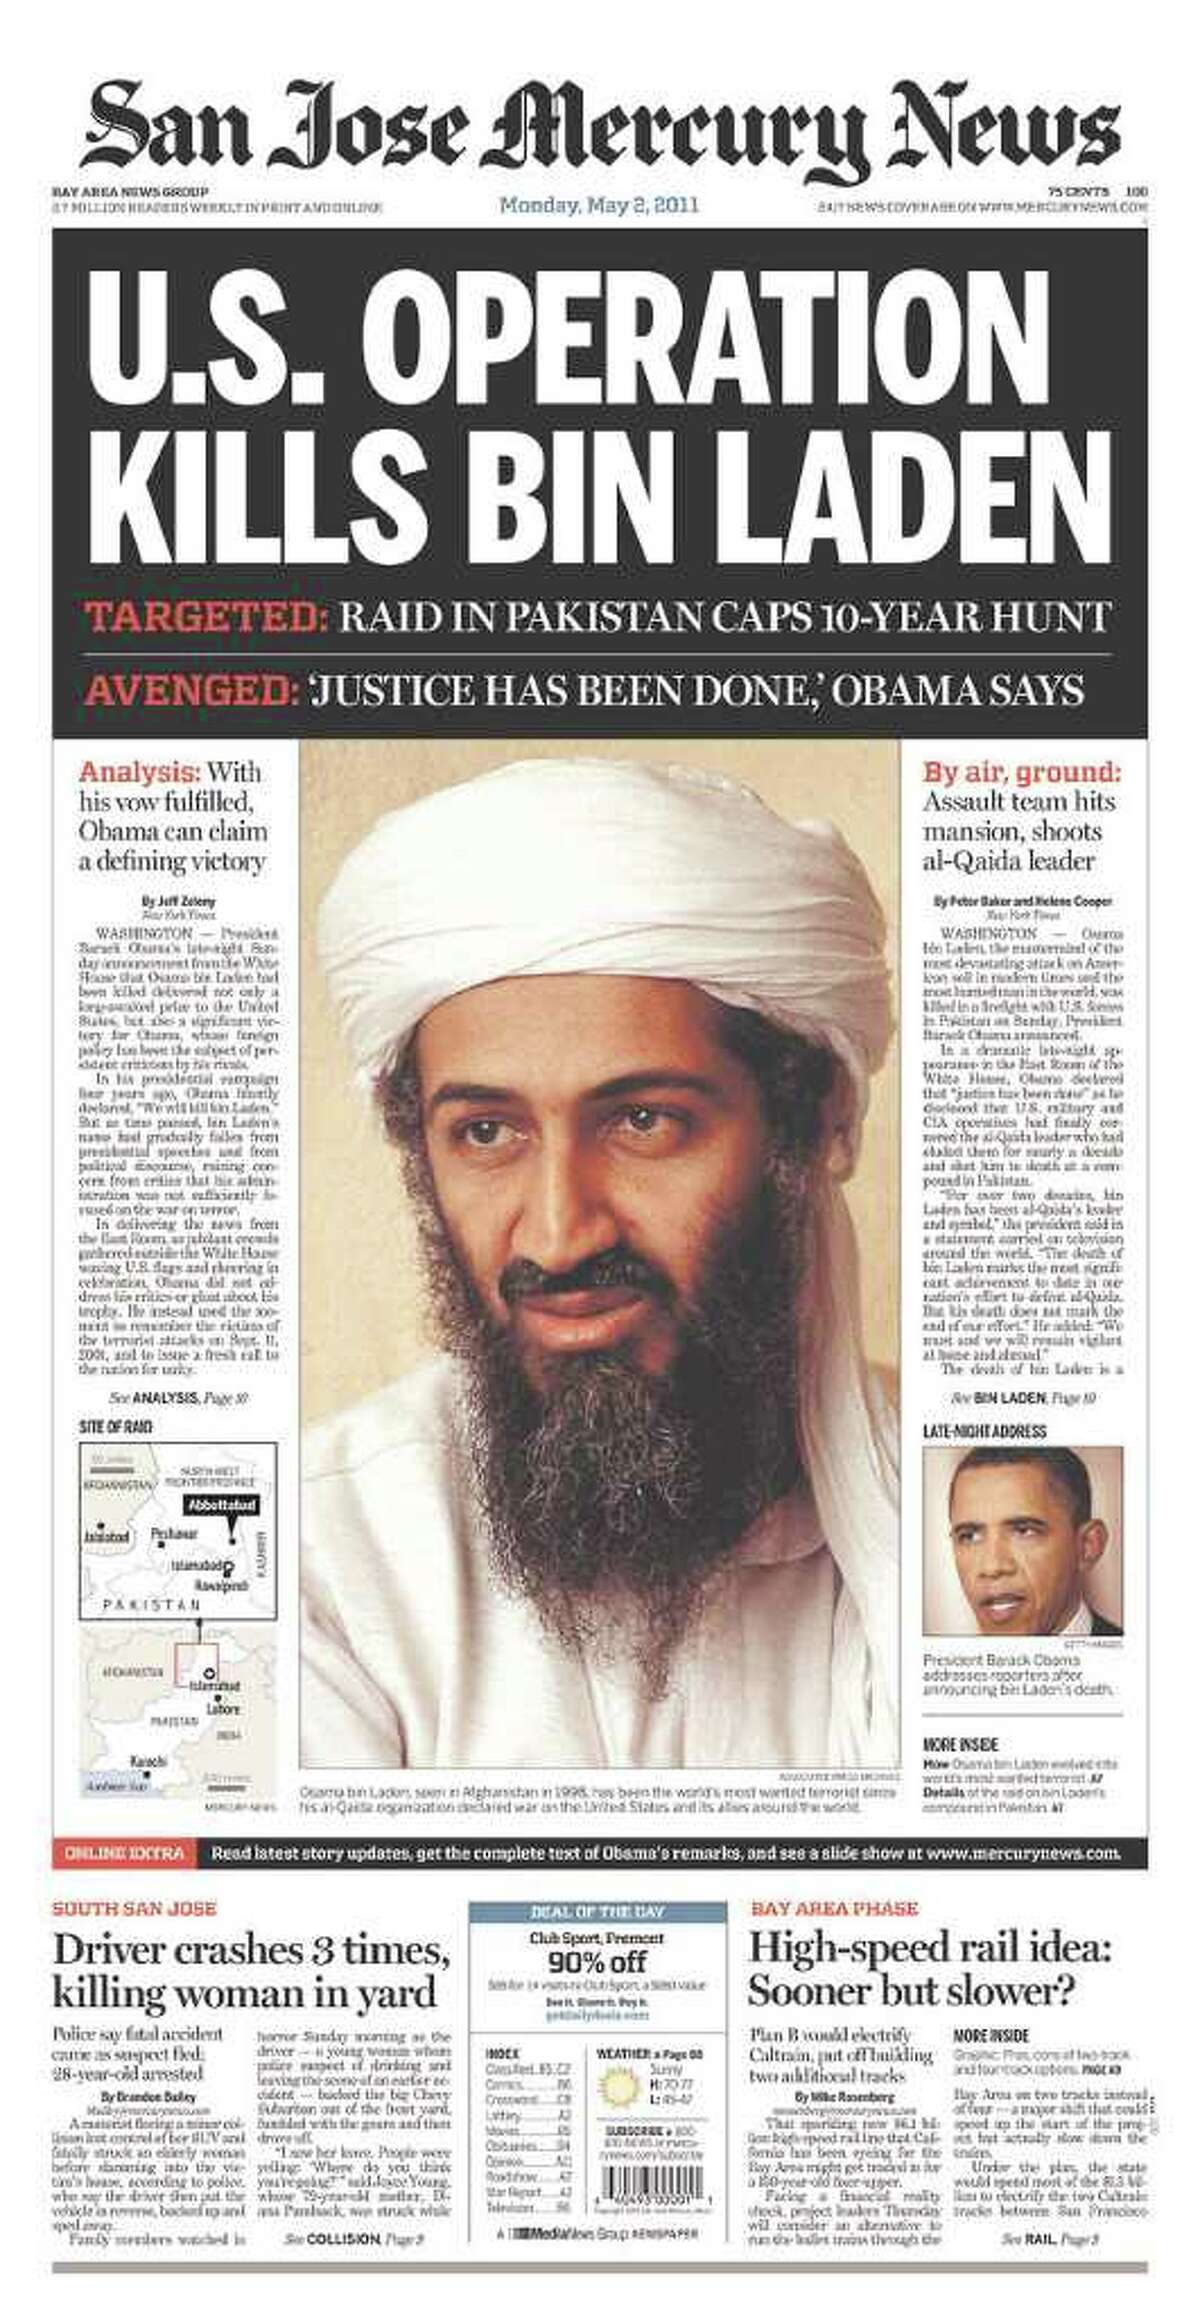 Bin Laden wanted Obama assassinated